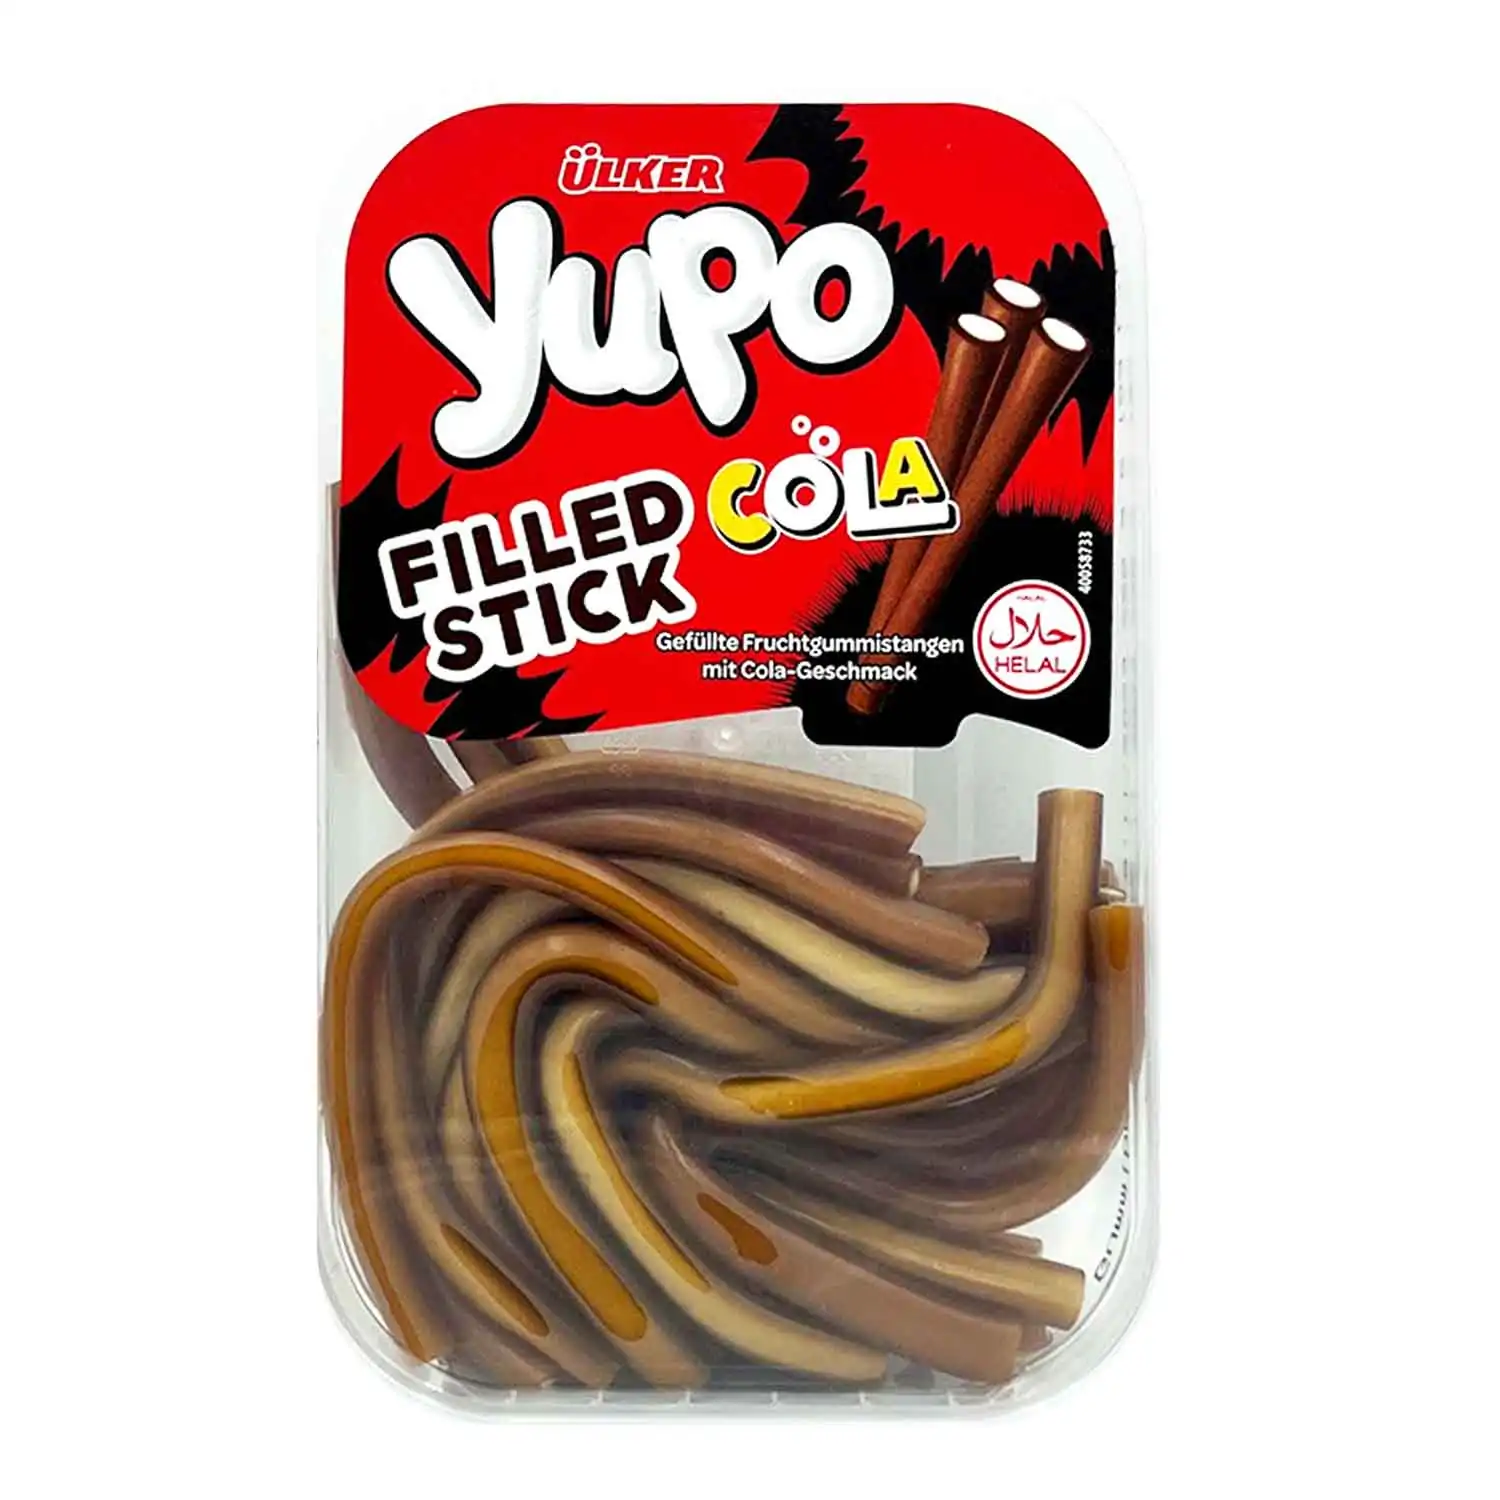 Yupo filled stick cola 225g - Buy at Real Tobacco